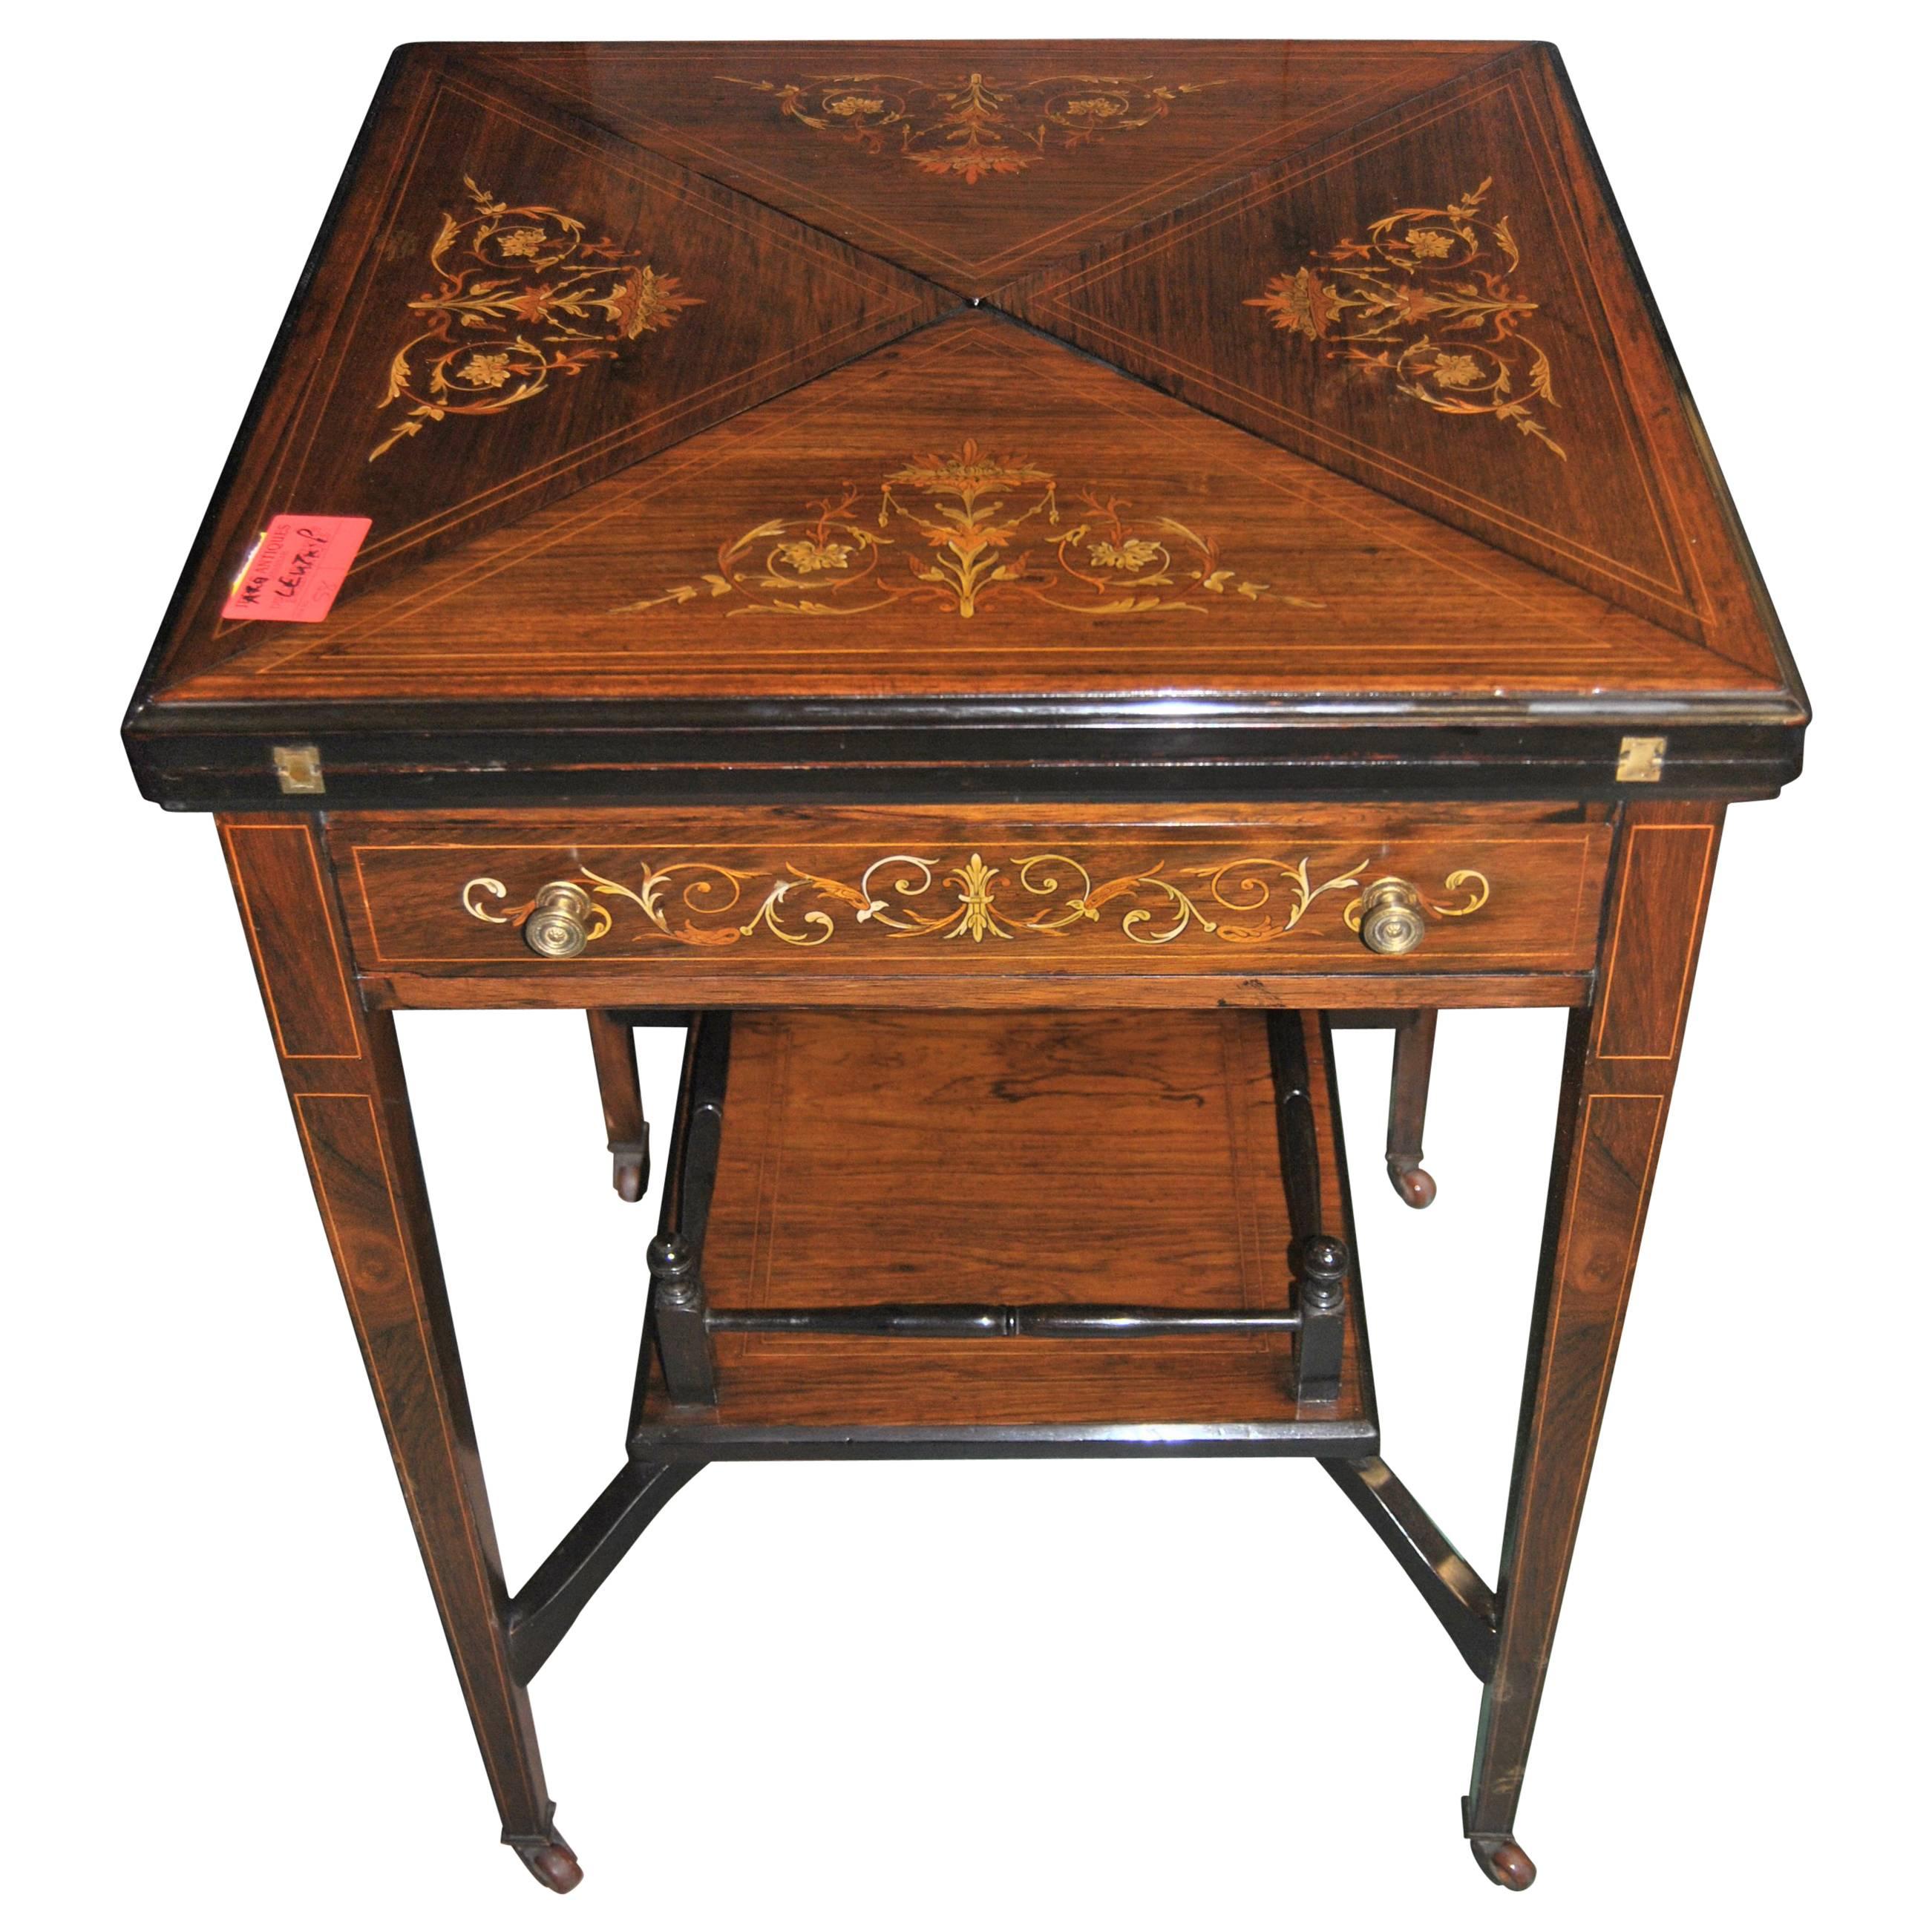 19th-20th Century English Game or Envelope Table